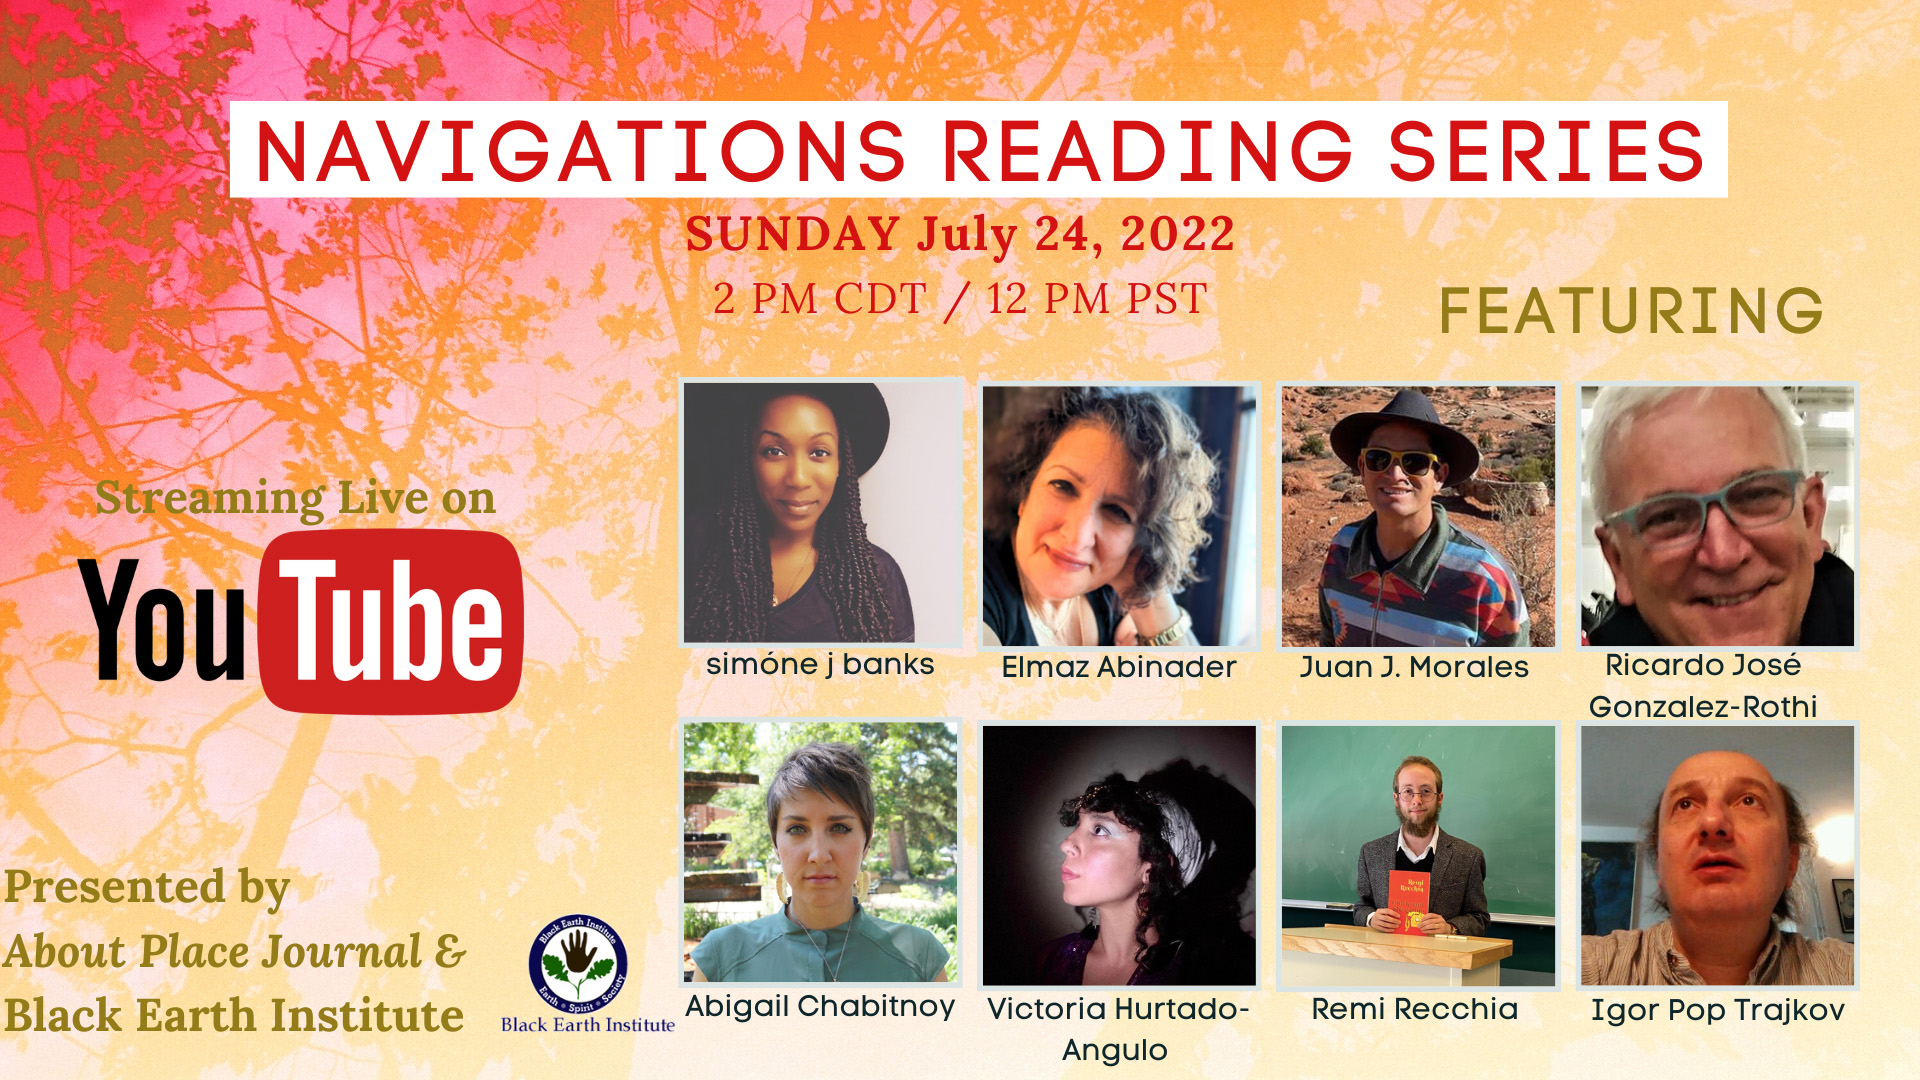 Navigations Reading Series – About Place Journal